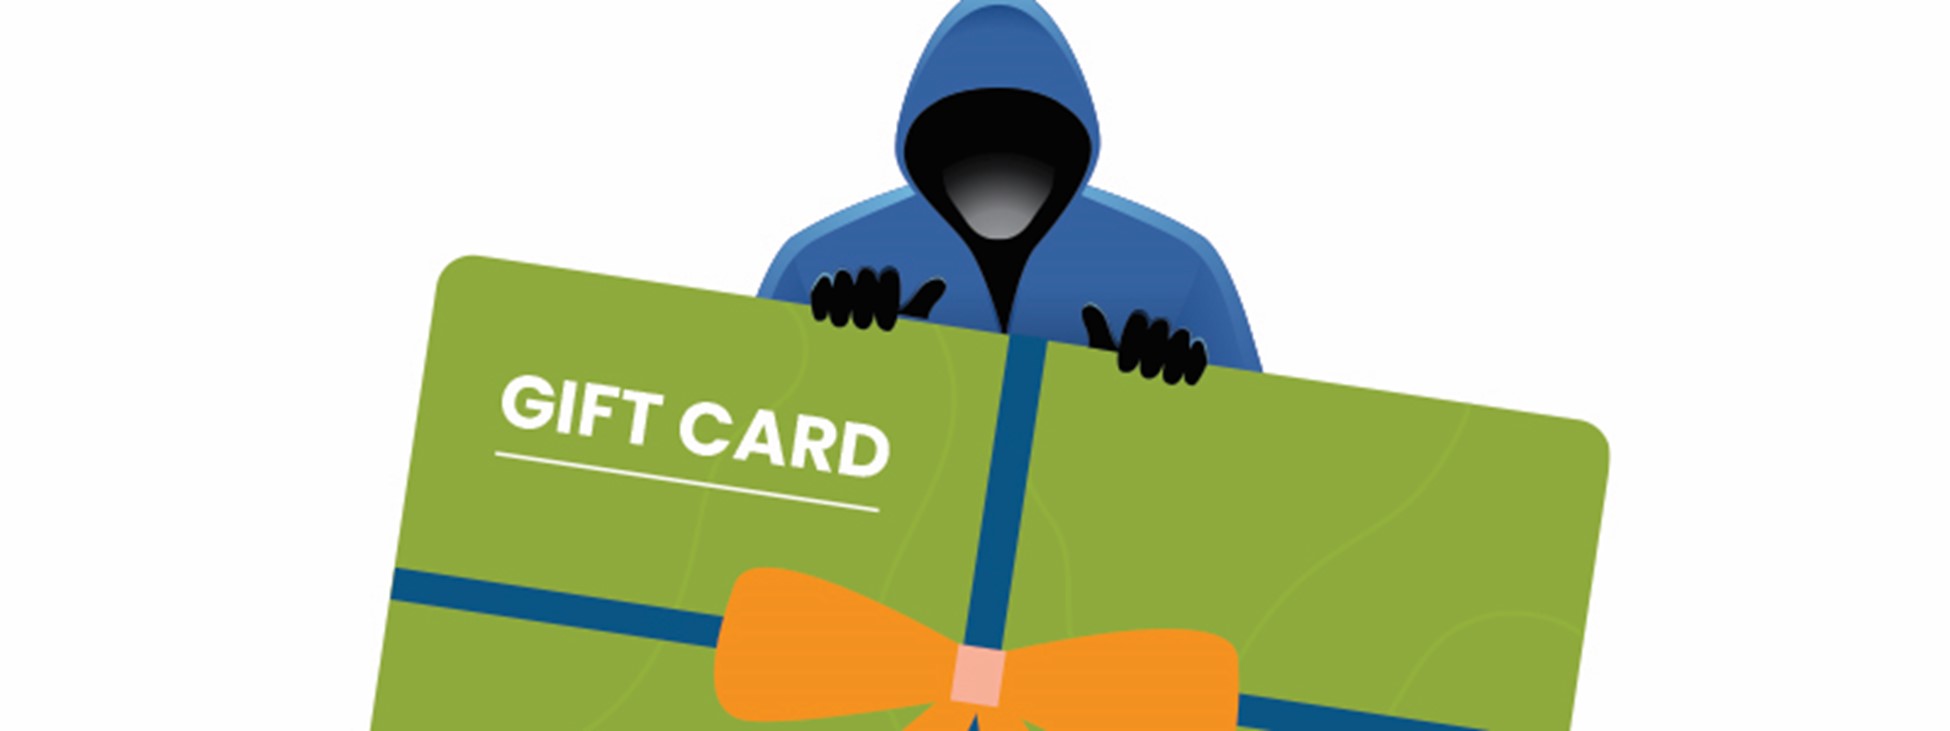 image of a gift card